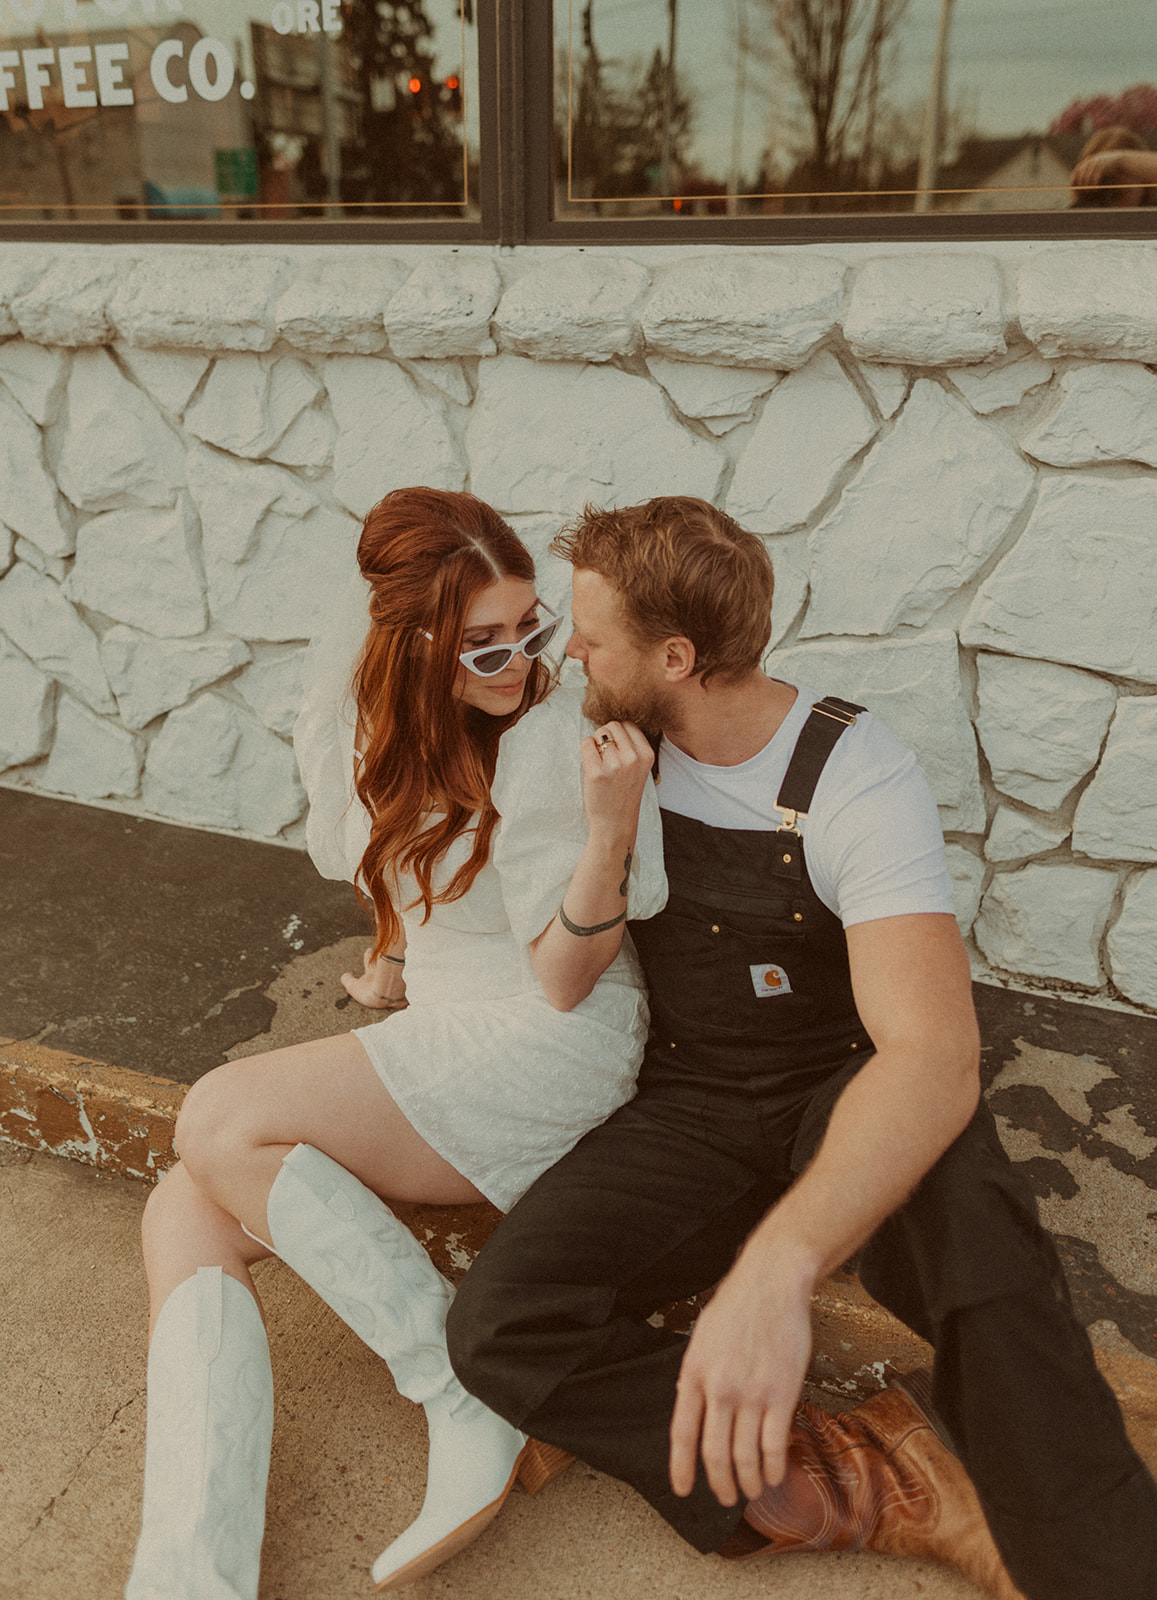 80's inspired outfits for an engagement session in Newberg, Oregon